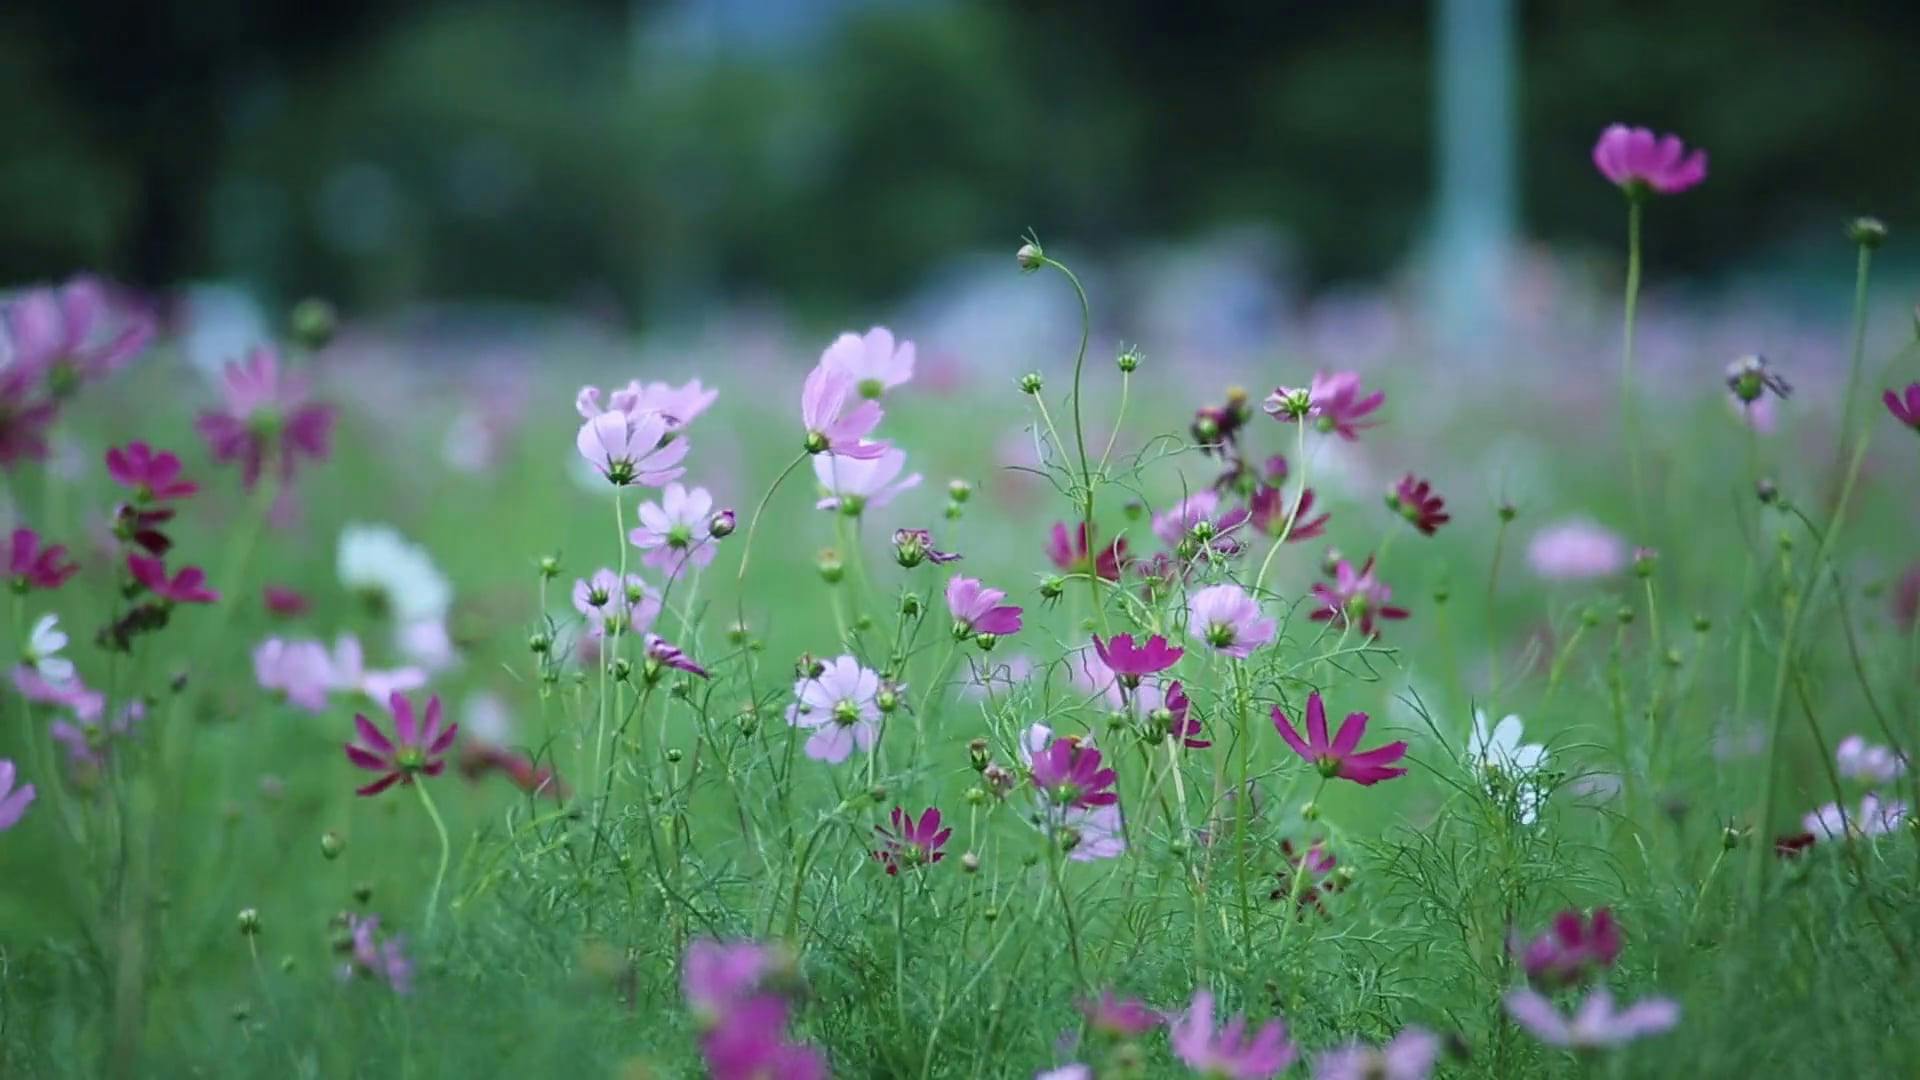 Purple And White Flowers During Windy Day · Free Stock Video